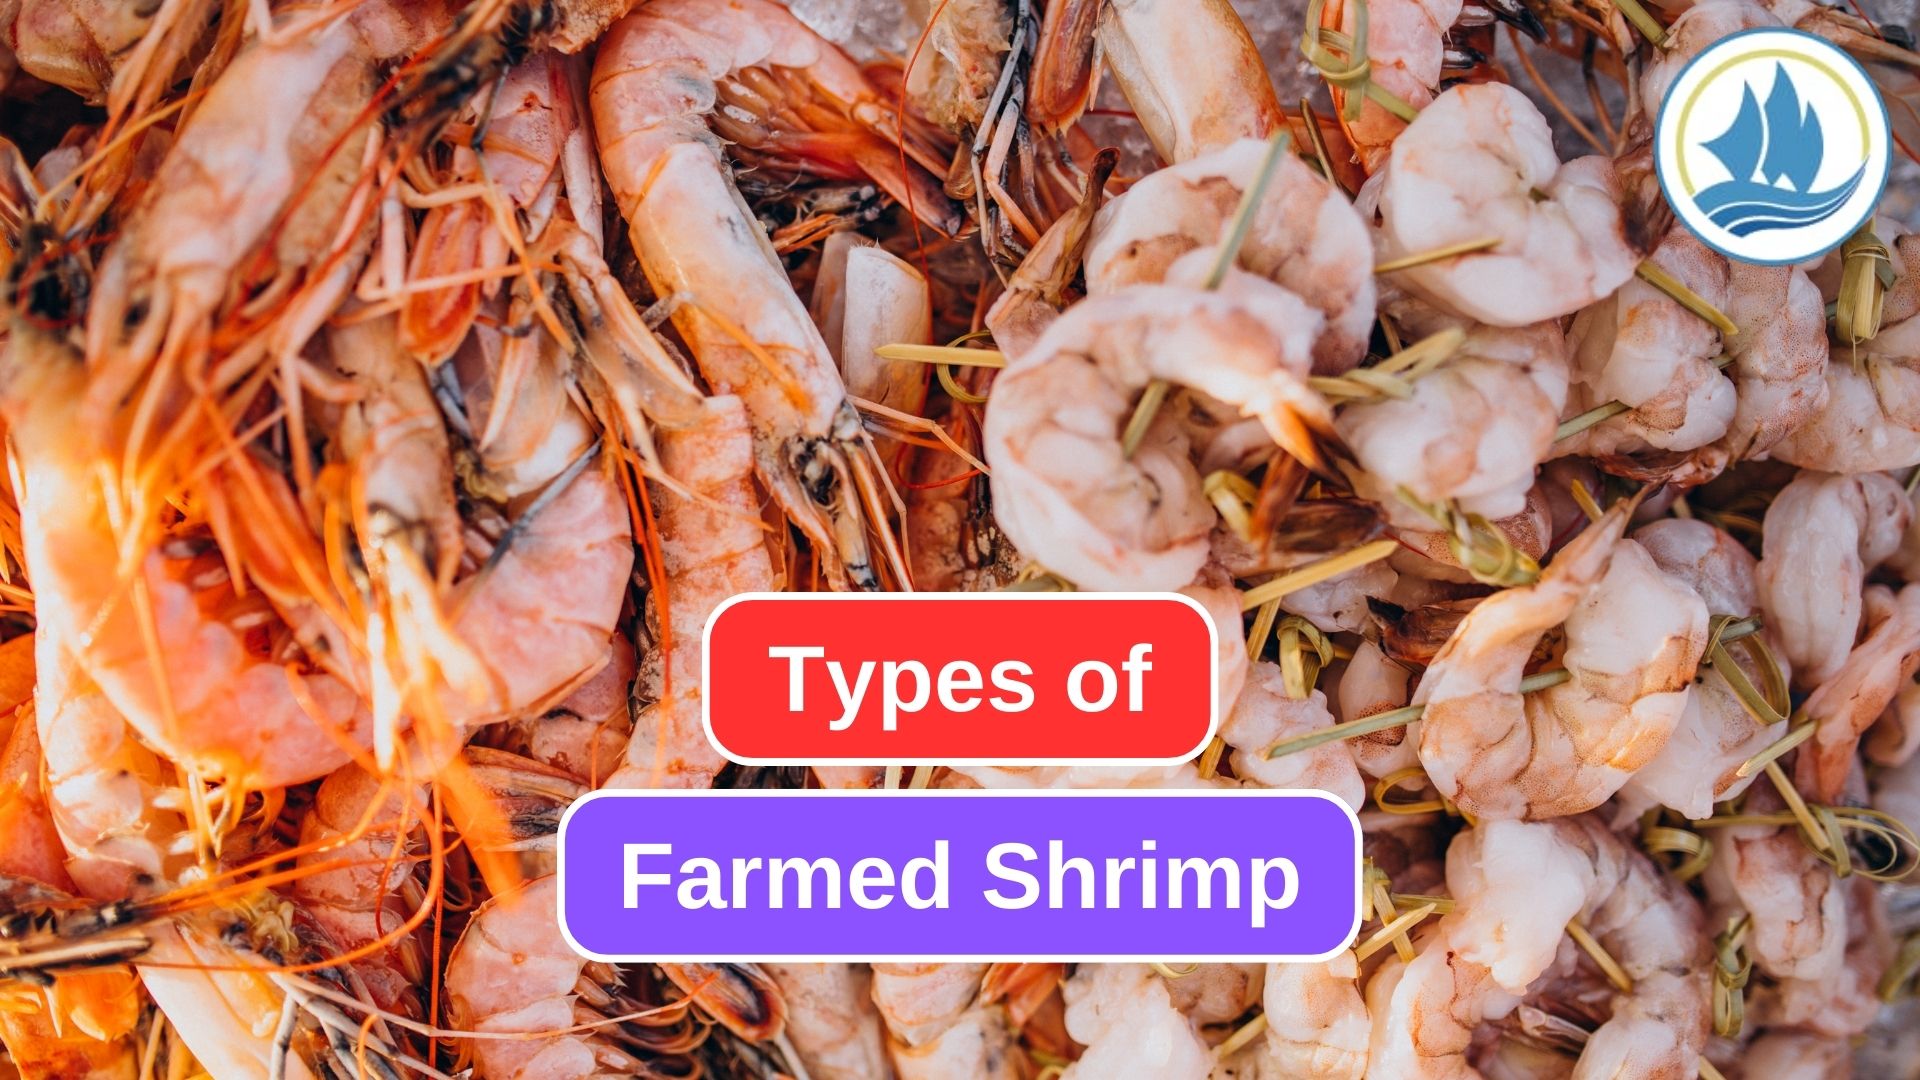 8 Types of Farmed Shrimp for the Aquaculture Industry